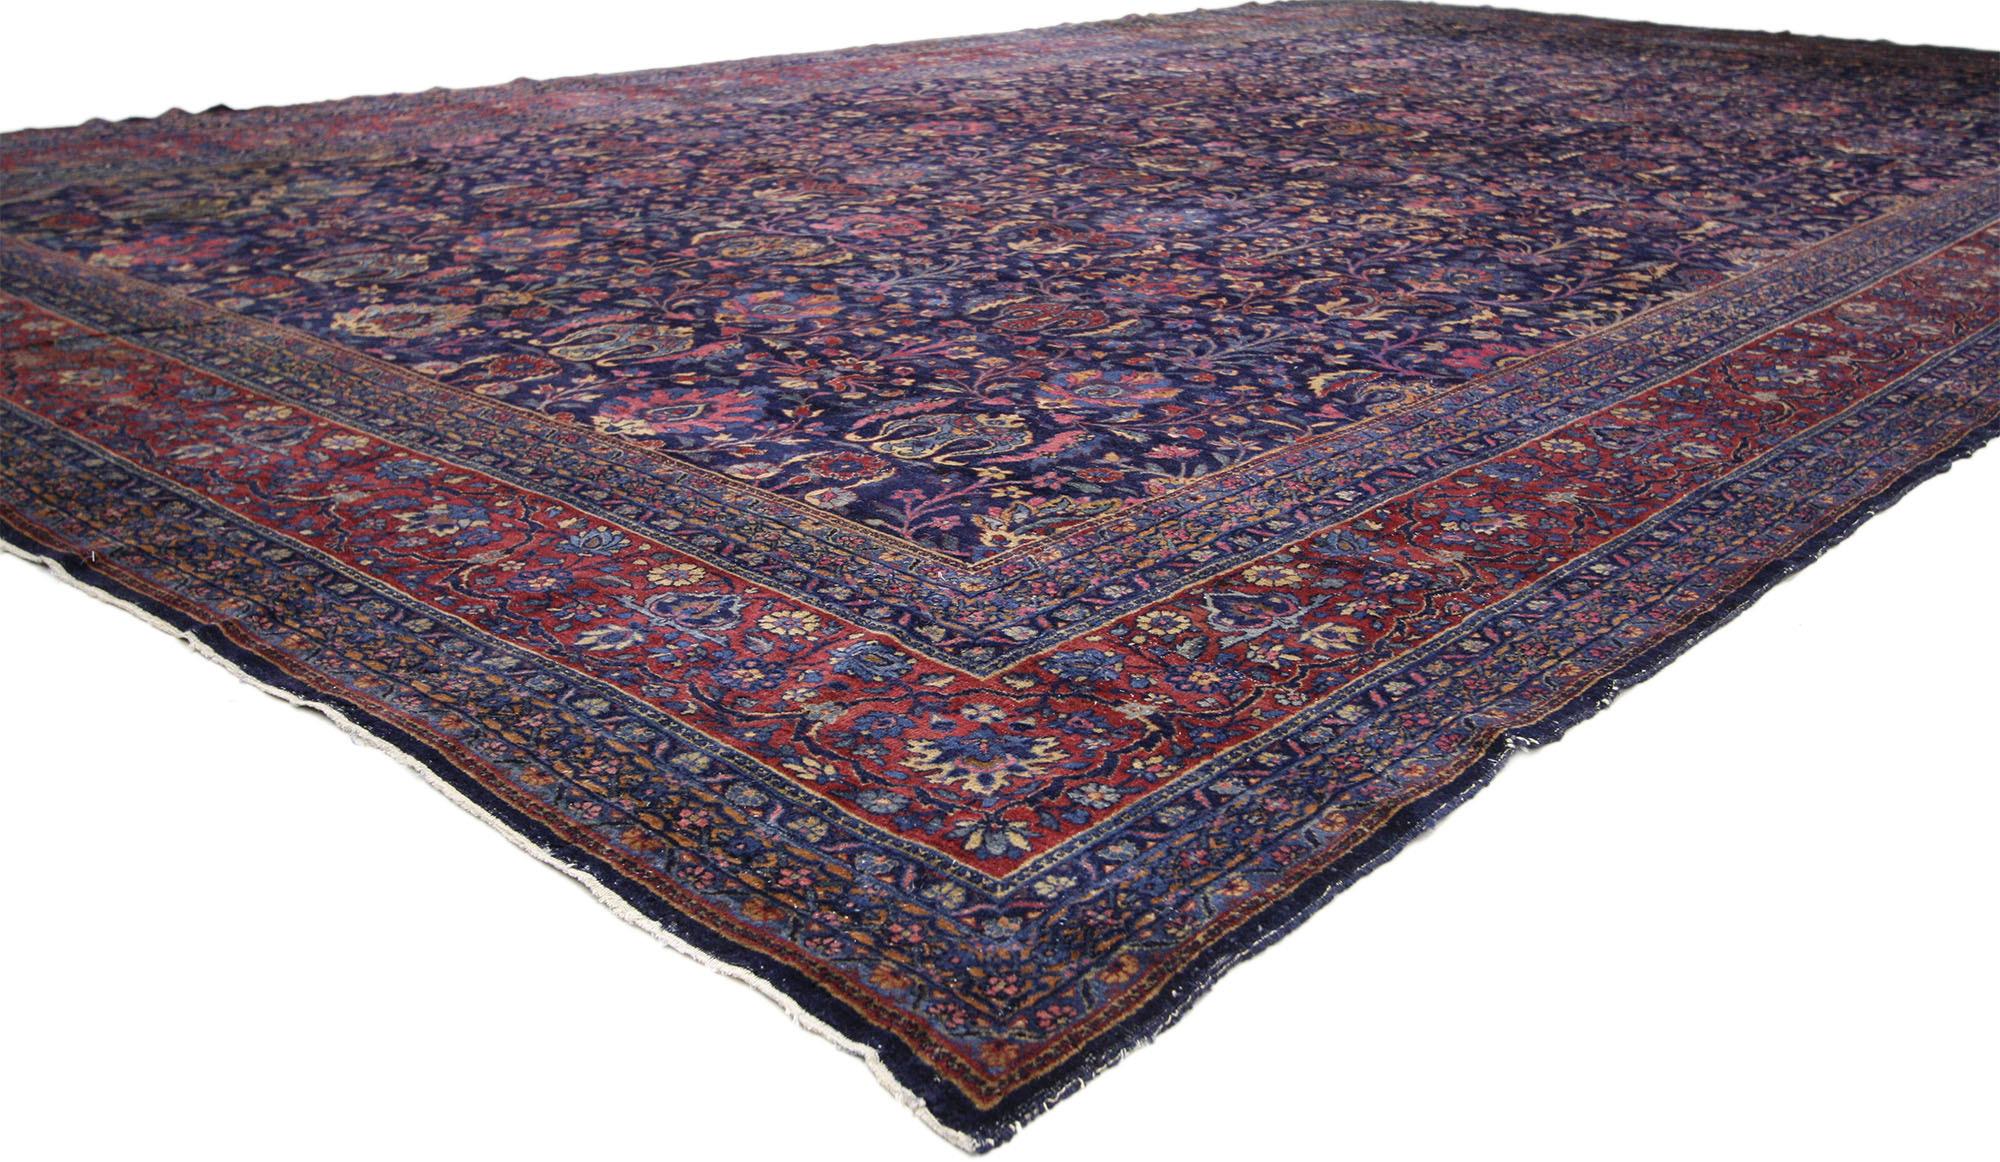 77185 Antique Persian Kerman Rug, 11’00 x 18’06. 
Captivating and irresistible with its dramatic backdrop and jewel-tone patterns this hand-knotted wool antique Persian Kerman rug is a theatrical experience with unexpected bursts of color and